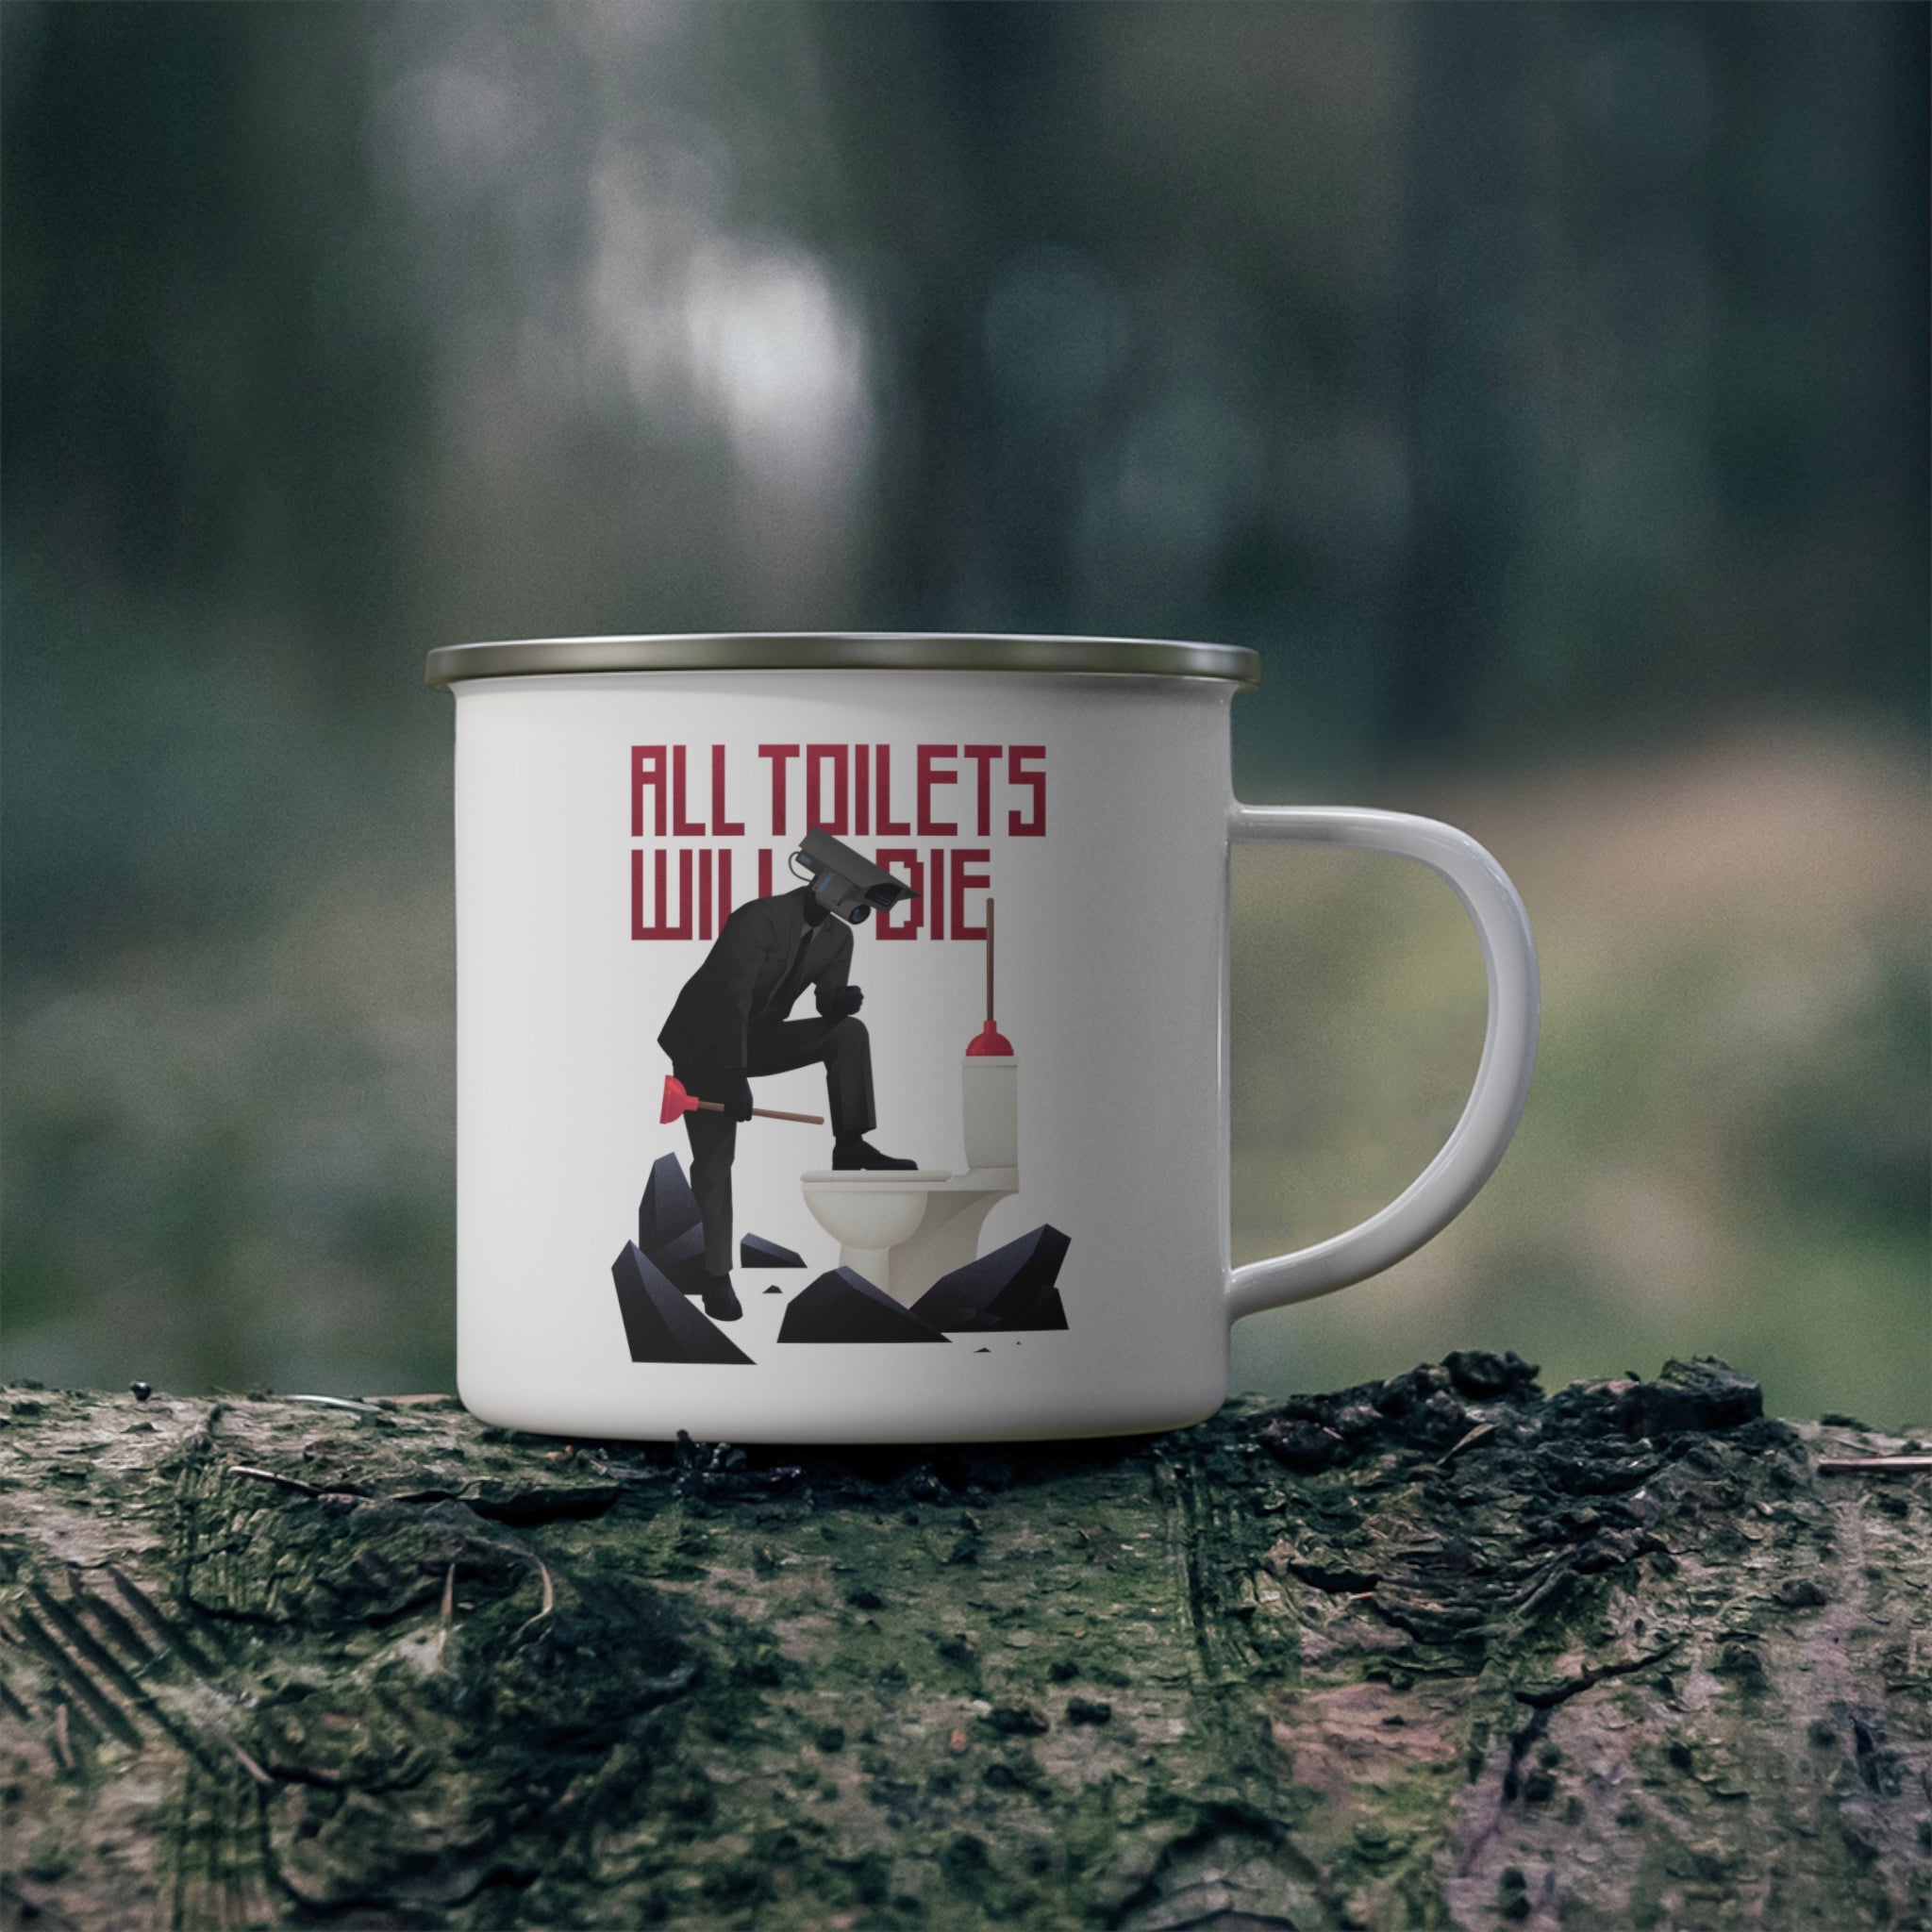 picture of white camping mug featuring an image of plungerman stepping on toilet mug. mug is on a log in nature